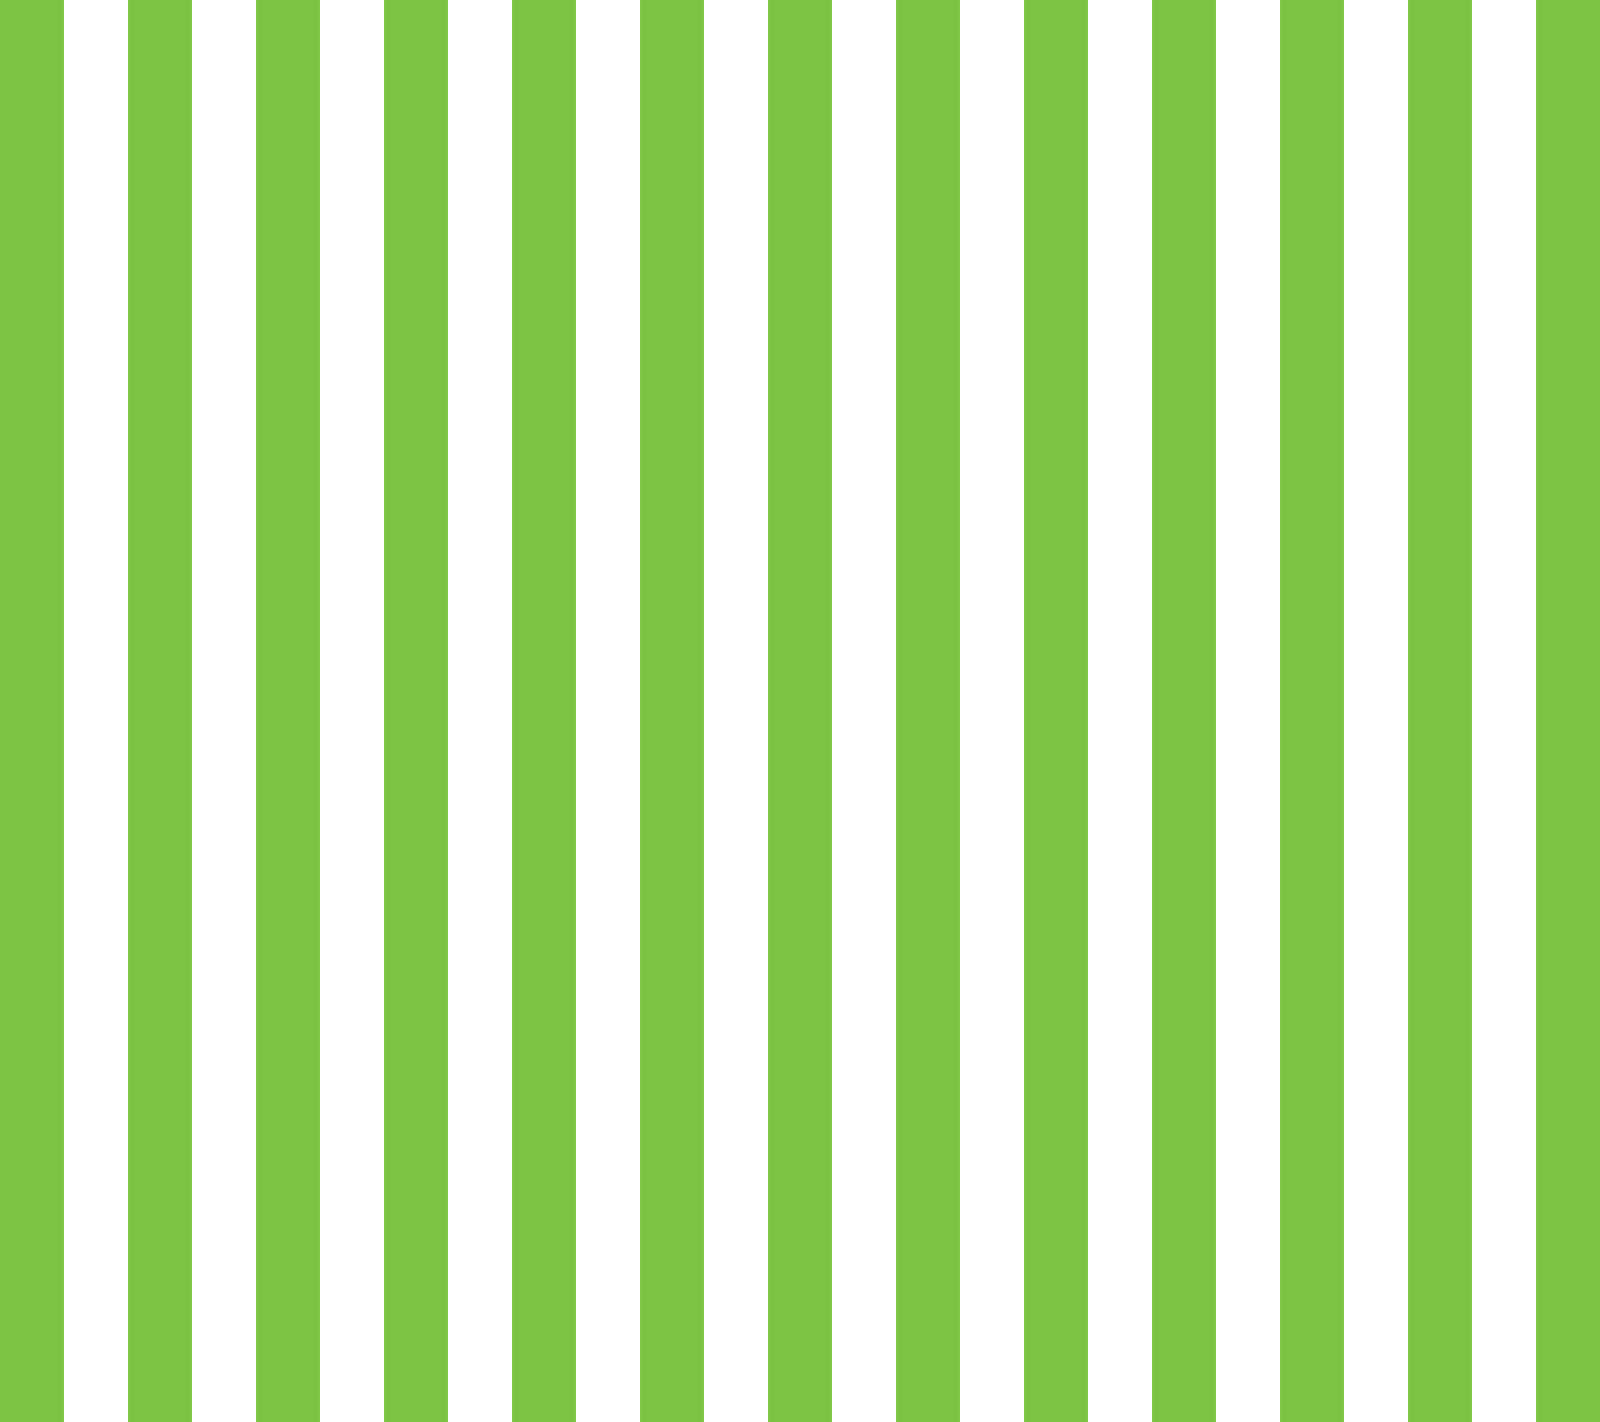 Arts & Crafts Style Striped Wallpaper | Springfield in Forest Green